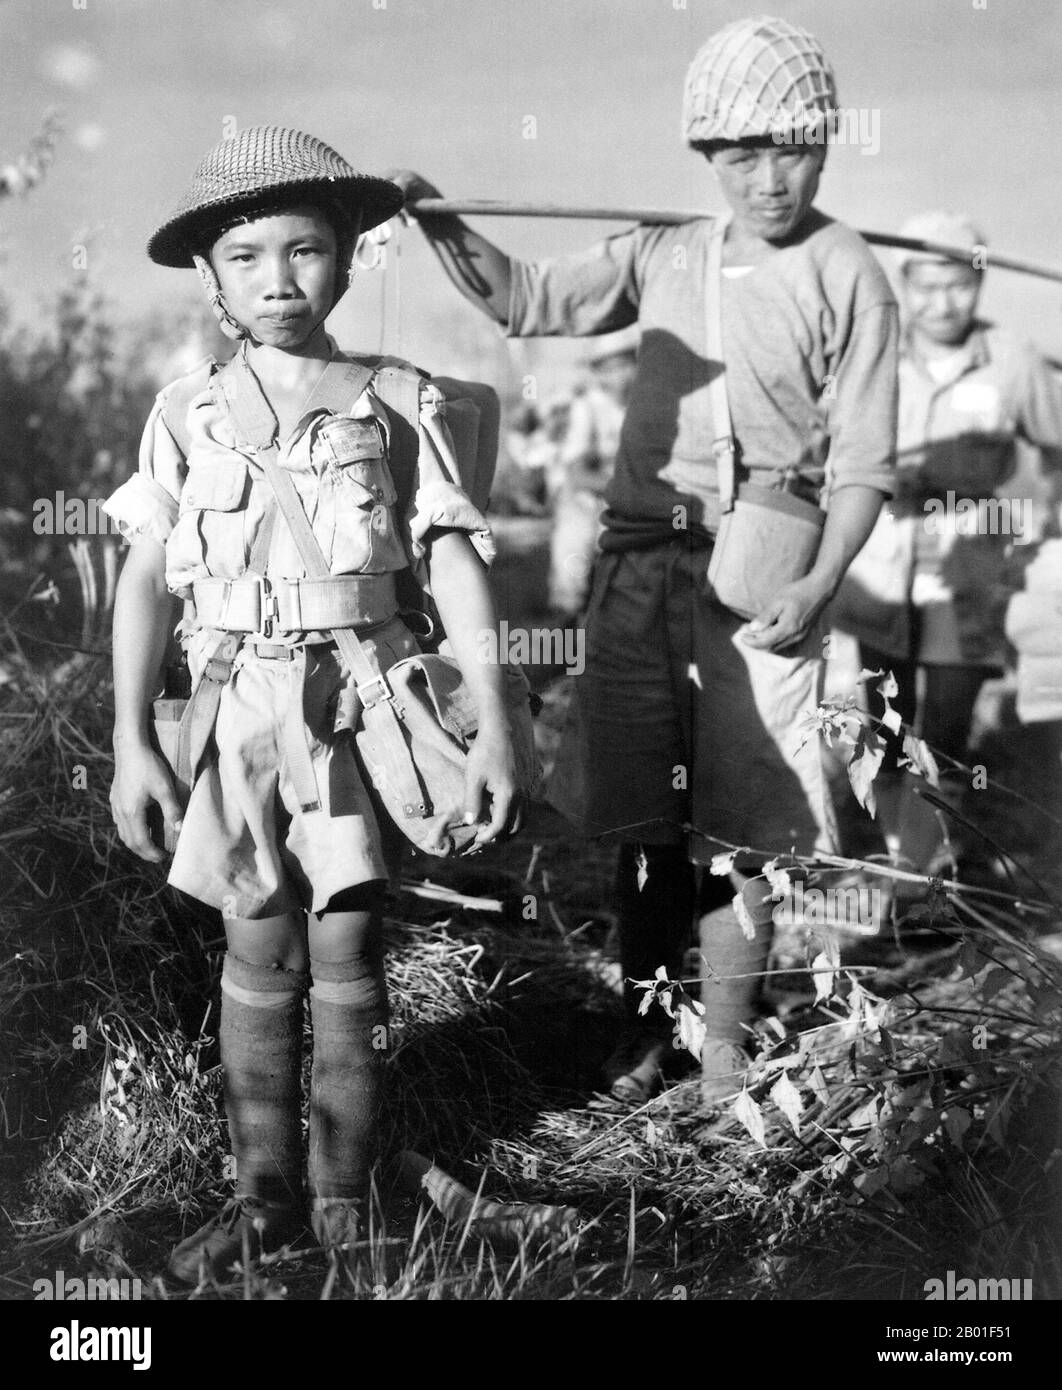 Burma/Myanmar: Chinese child soldier on the China-Burma-India Theatre at Myitkyina, May 1944.  This Chinese child soldier, age 10, with heavy pack, was a member of an army division boarding a plane returning them to China, following the capture of Myitkyina airfield, Burma, under the allied command of US Major General Frank Merrill.  Chinese and allied troops had earlier crossed through the treacherous jungle of the Kumon Bum Mountains before attacking Japanese troops to the south. Exhaustion and disease led to the early evacuation of many Chinese and allied troops before the coming assault. Stock Photo